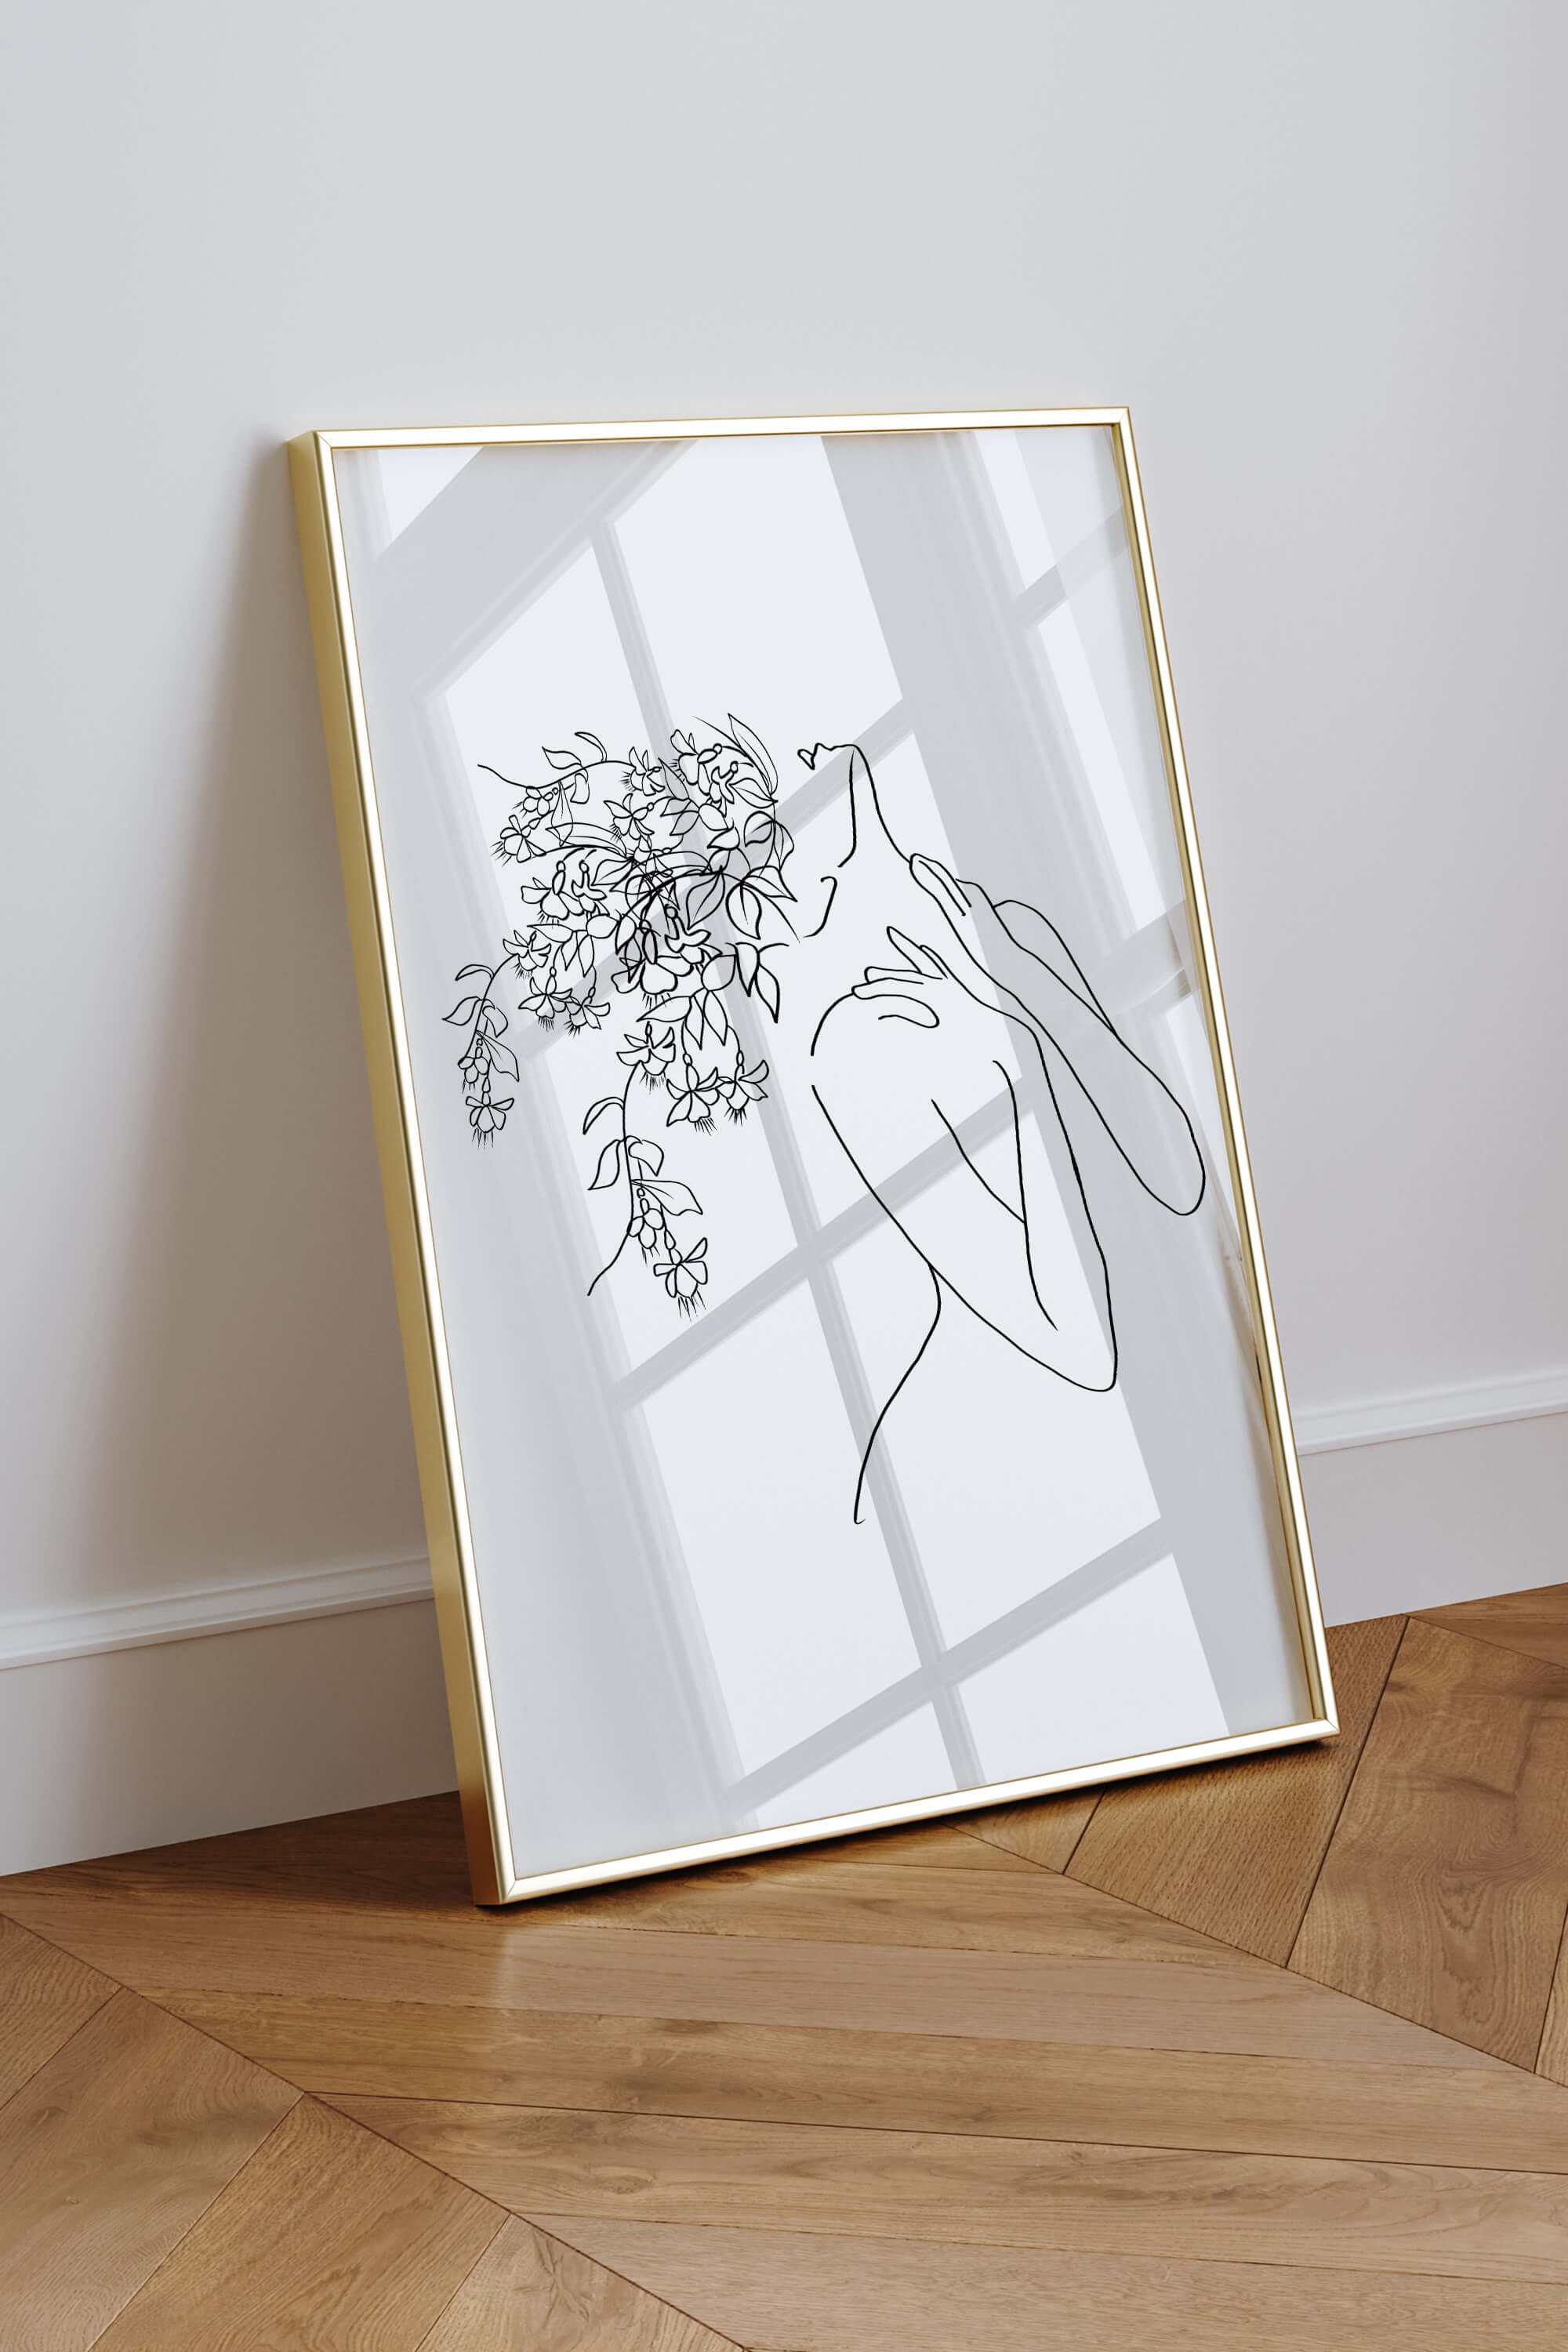 Timeless monochrome enhancement featuring the silhouette of a woman in a captivating line art style. This print transcends color, focusing on the emotion and power within each line.